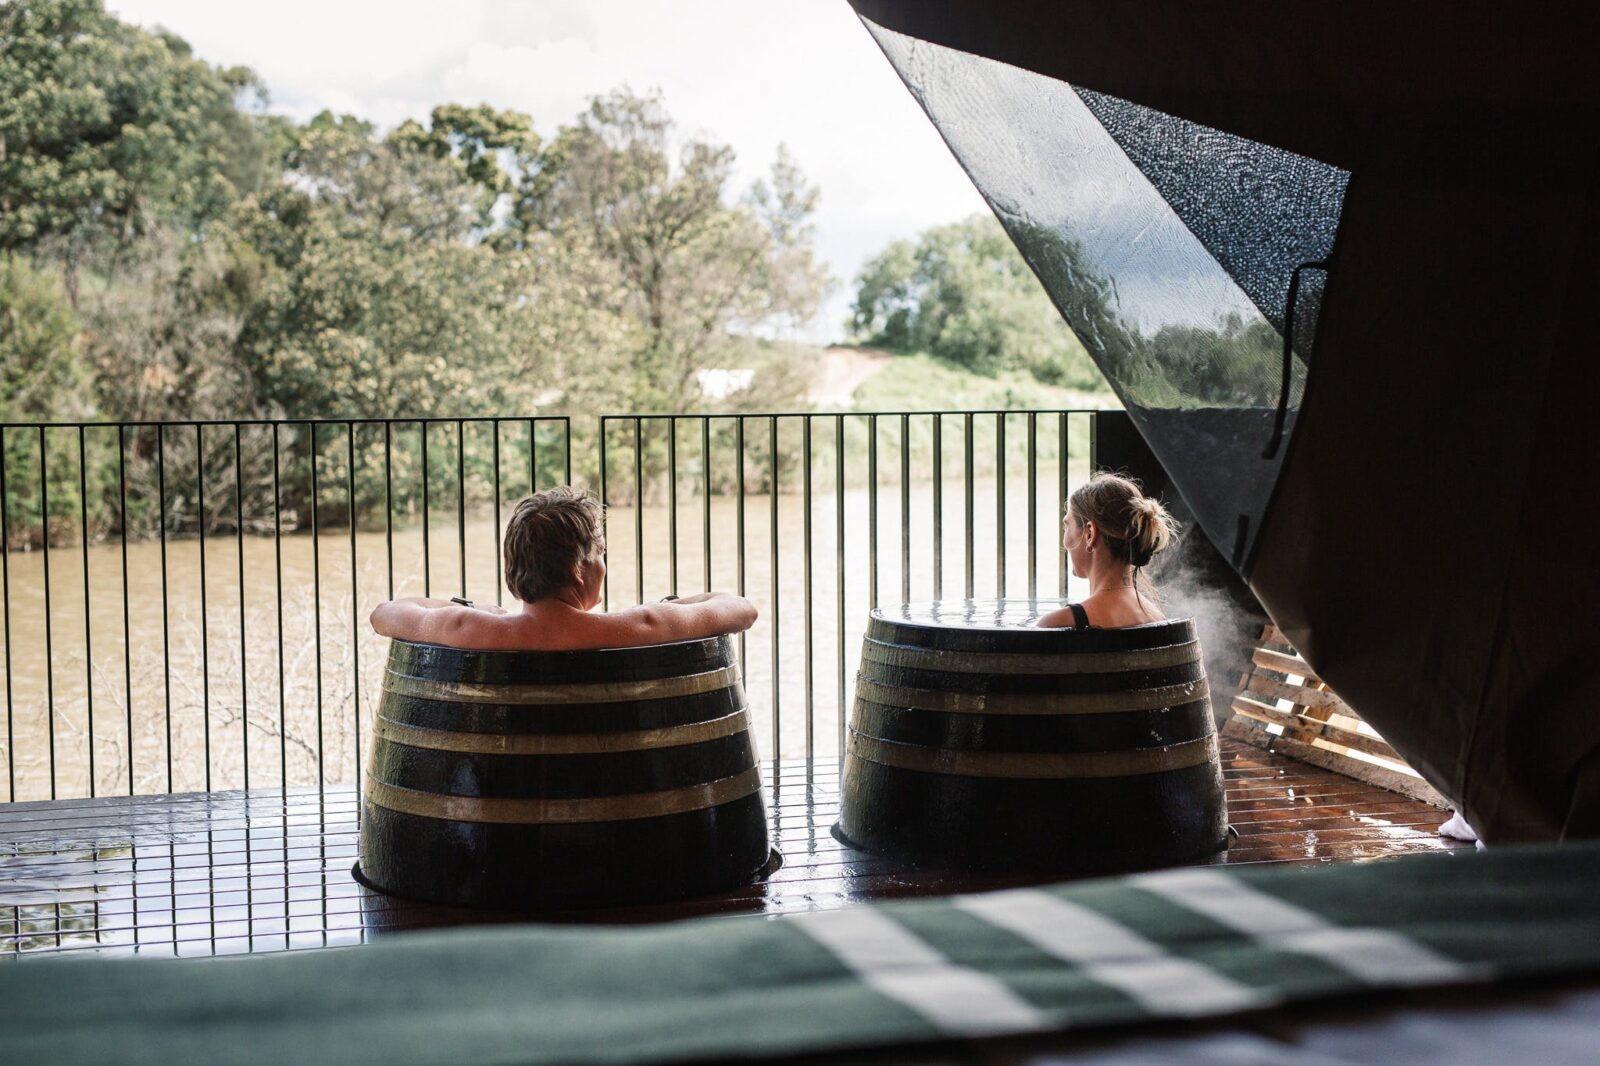 Man and woman bathing in hot springs barrels on their private glamping deck overlooking nature